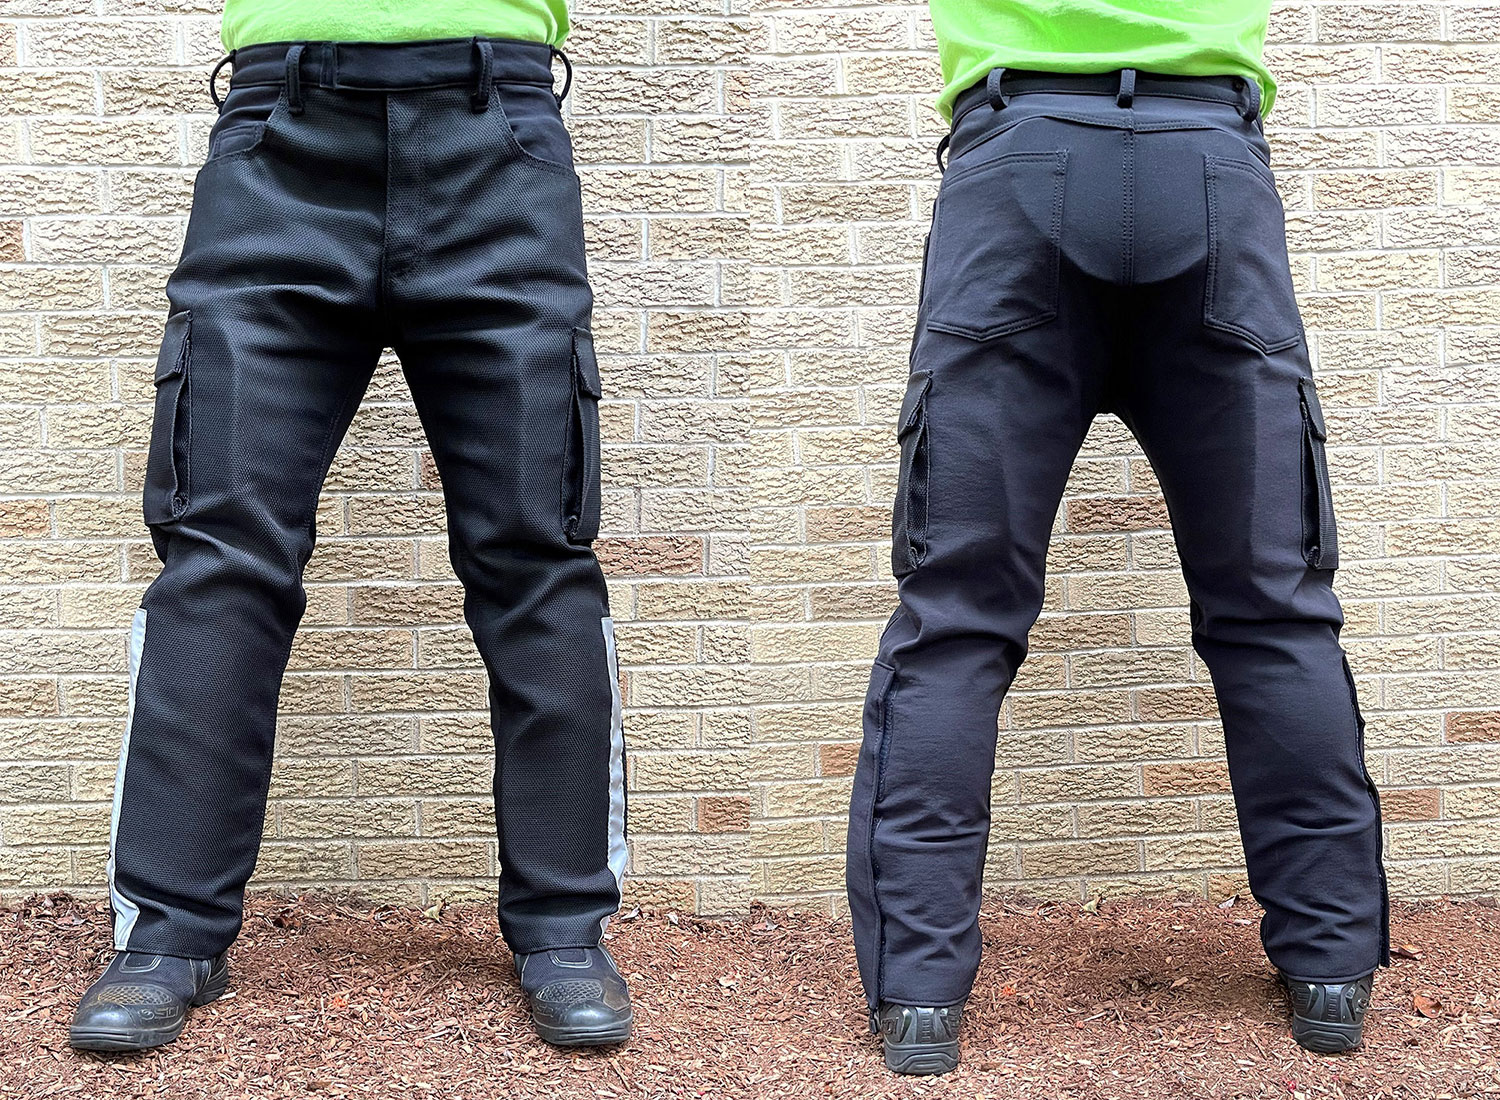 Iron Workers Rider Cargo Pants - Cycle Gear